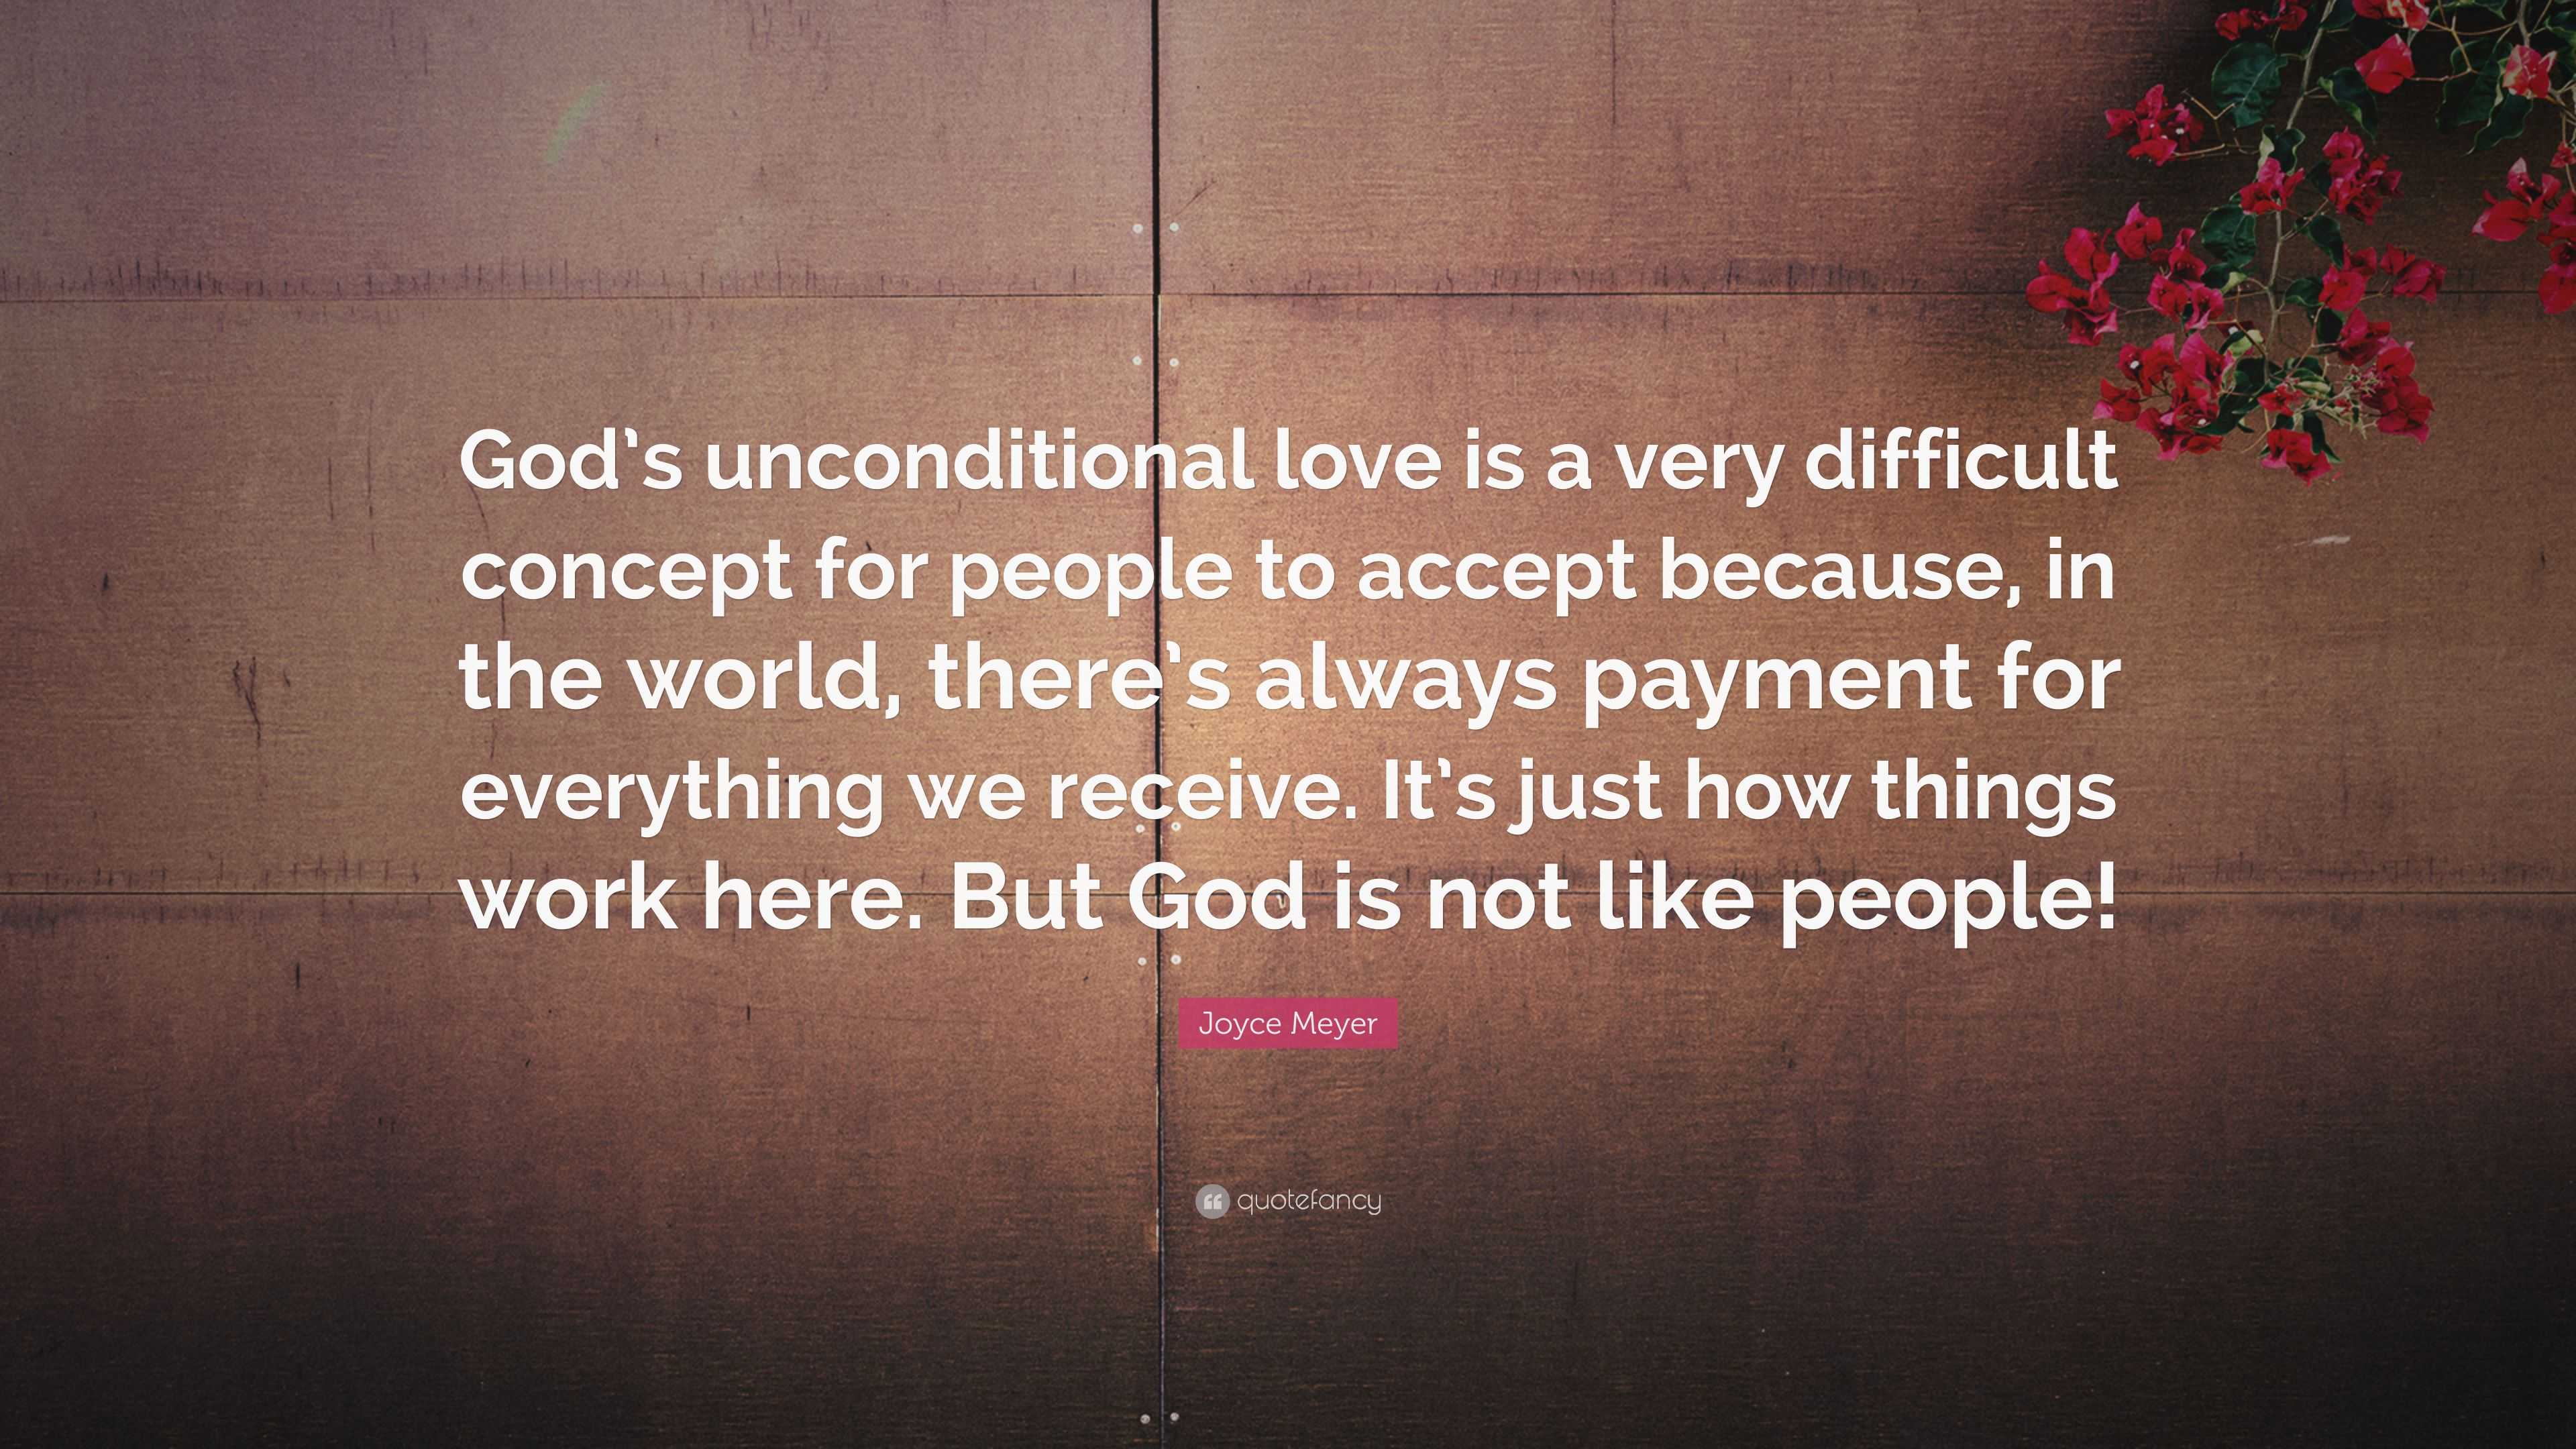 Joyce Meyer Quote “God s unconditional love is a very difficult concept for people to